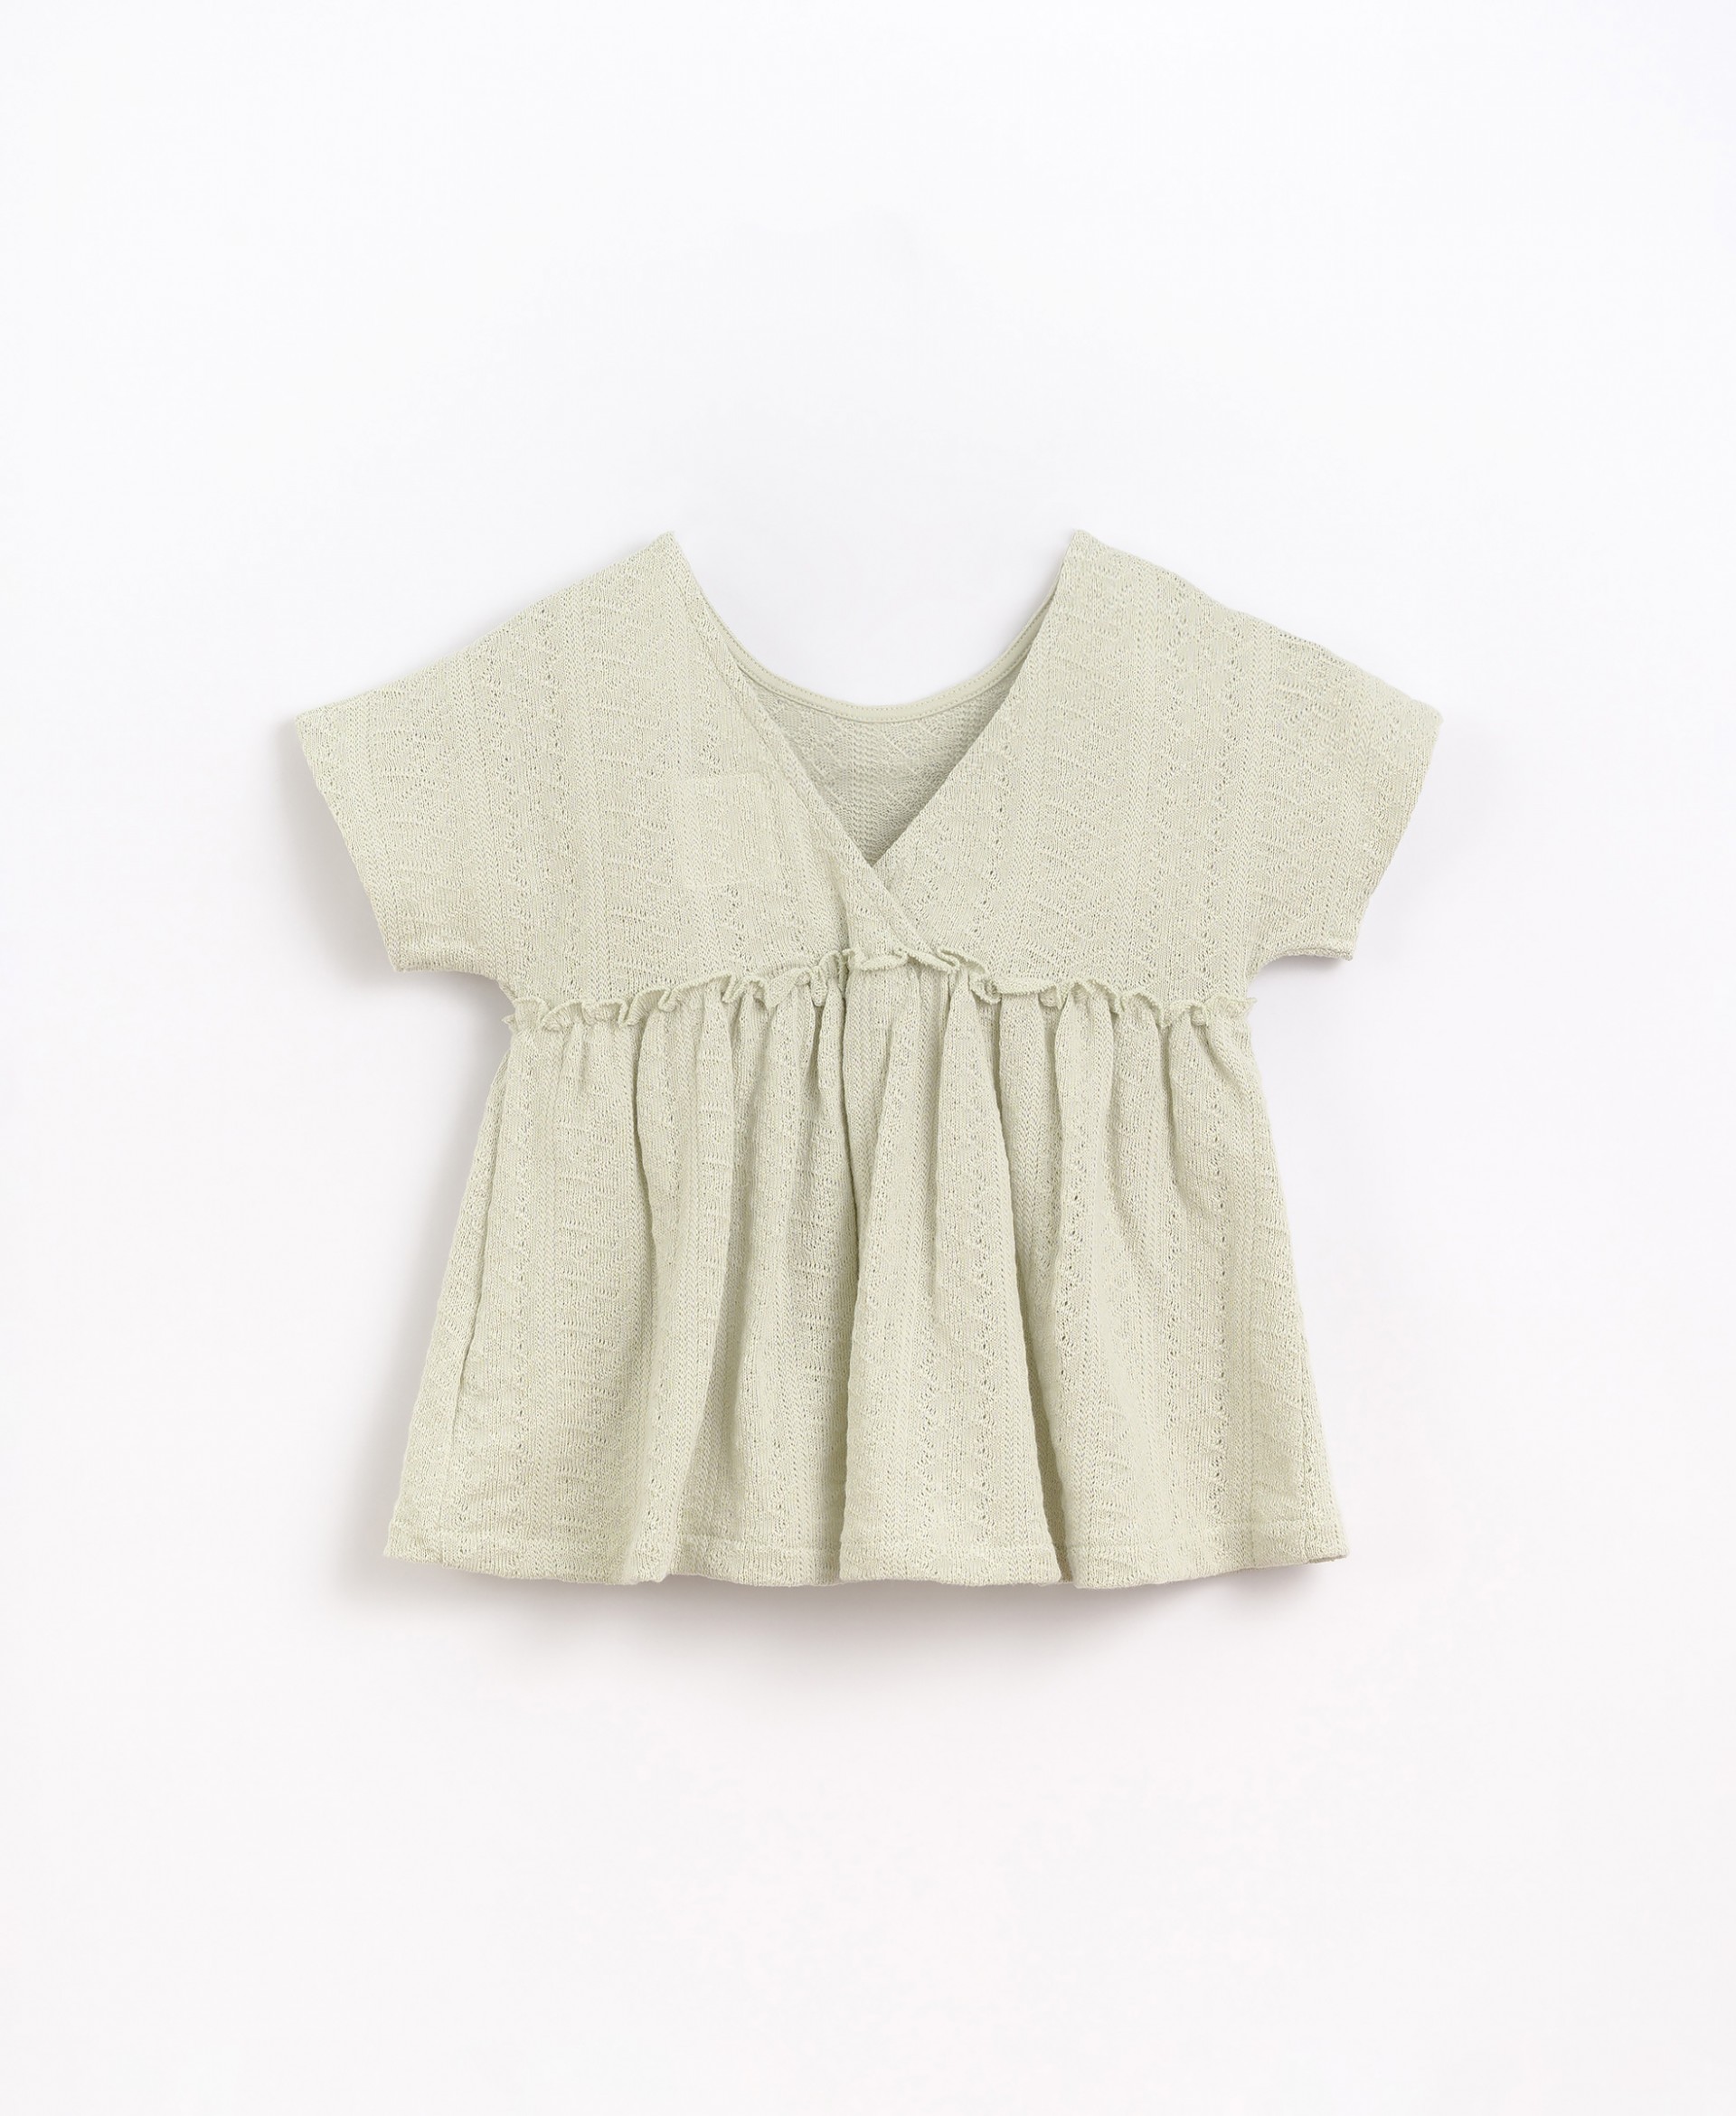 Tunic with ruffle detail | Basketry